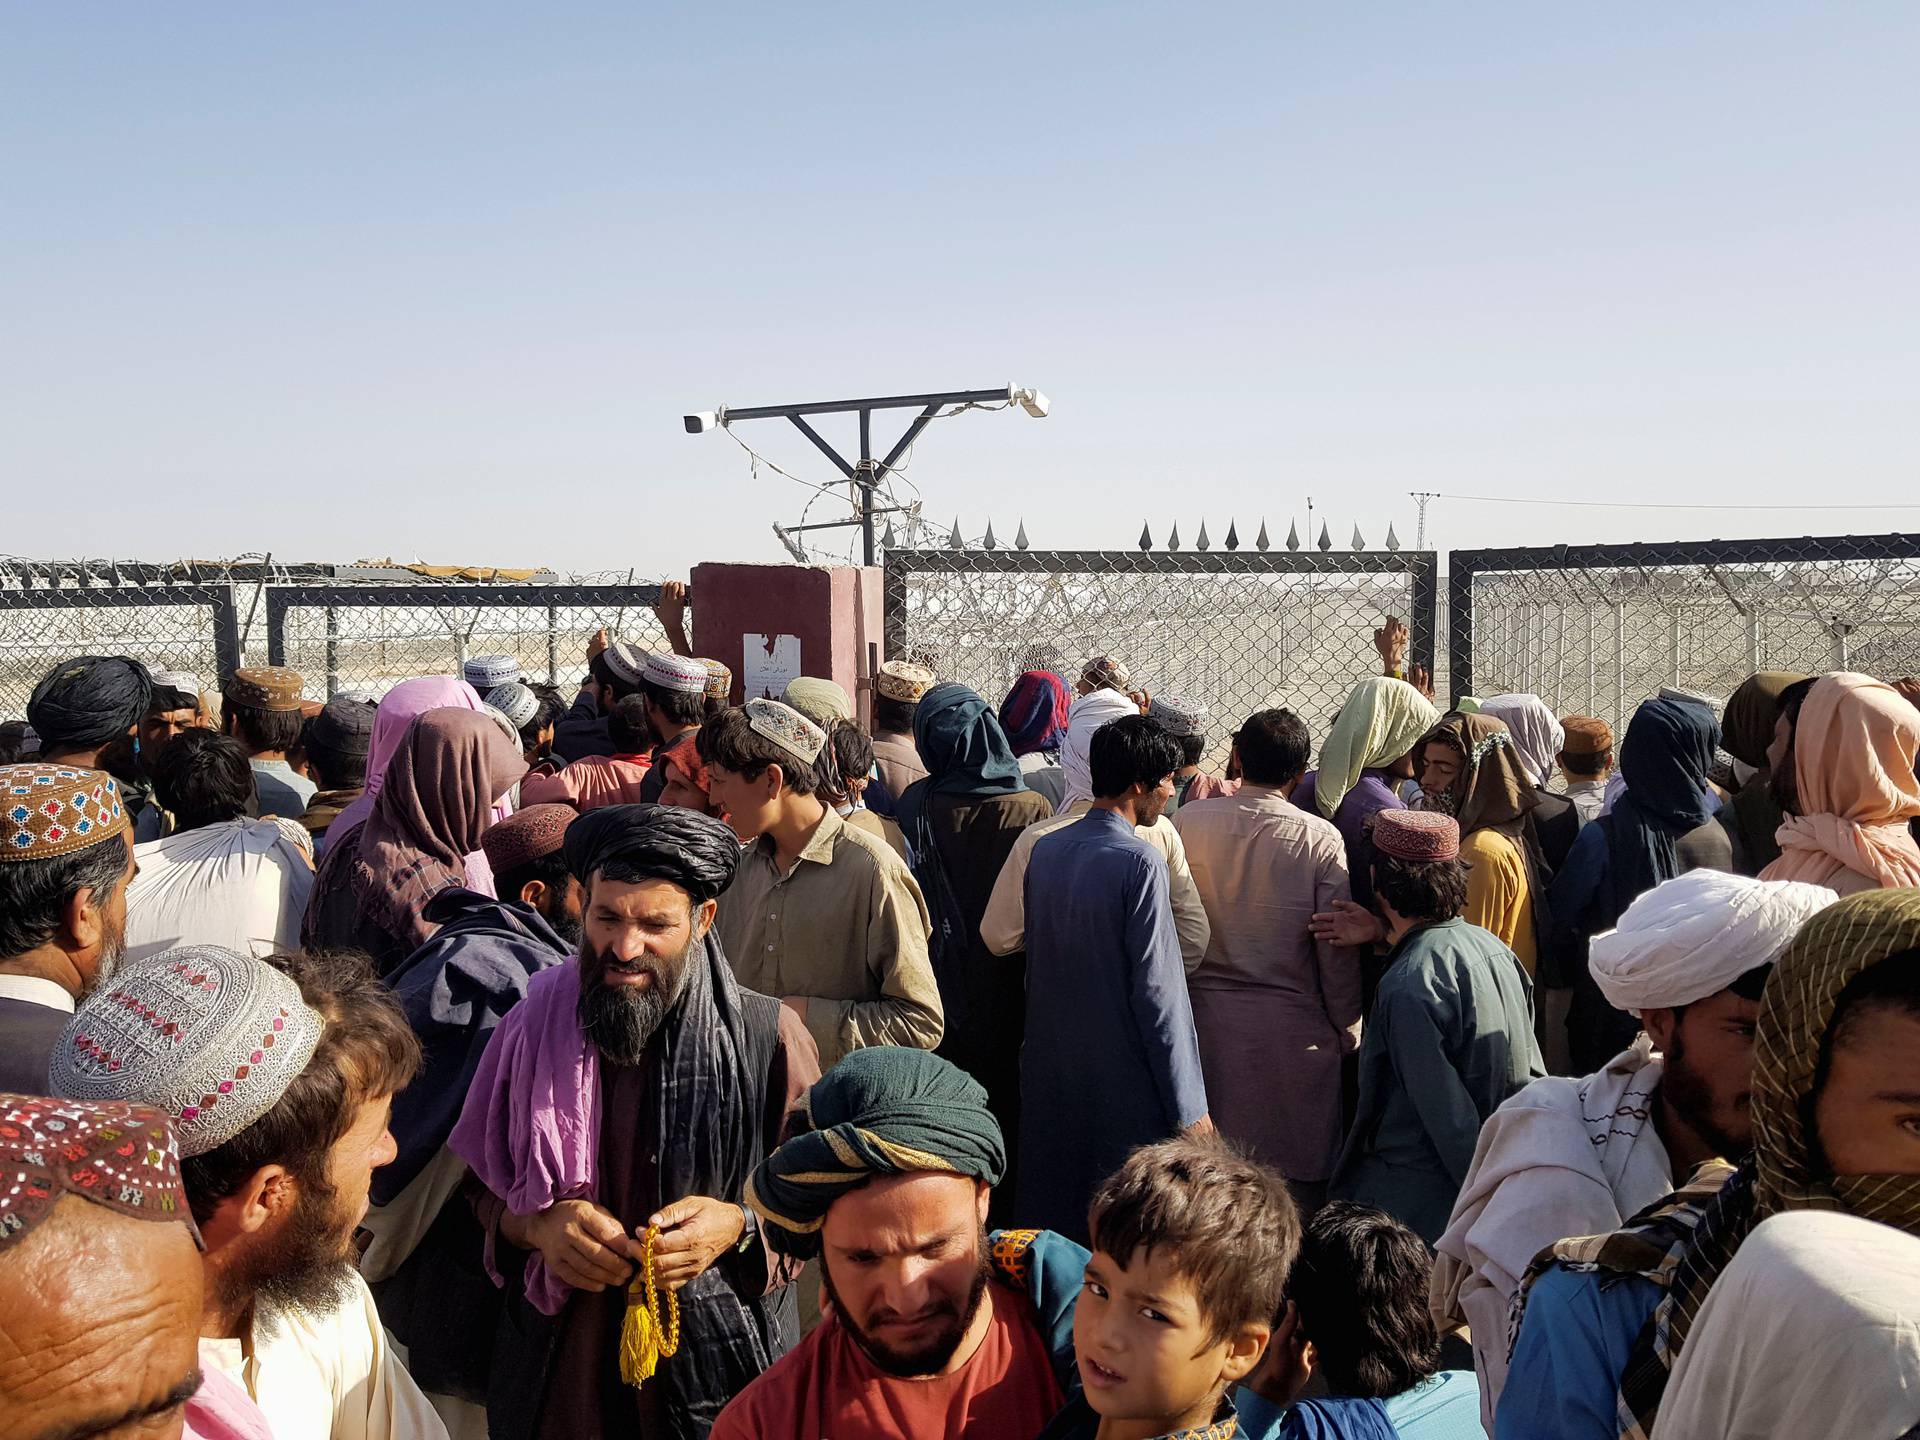 People gather as they wait to cross at the Friendship Gate crossing point in the Pakistan-Afghanistan border town of Chaman